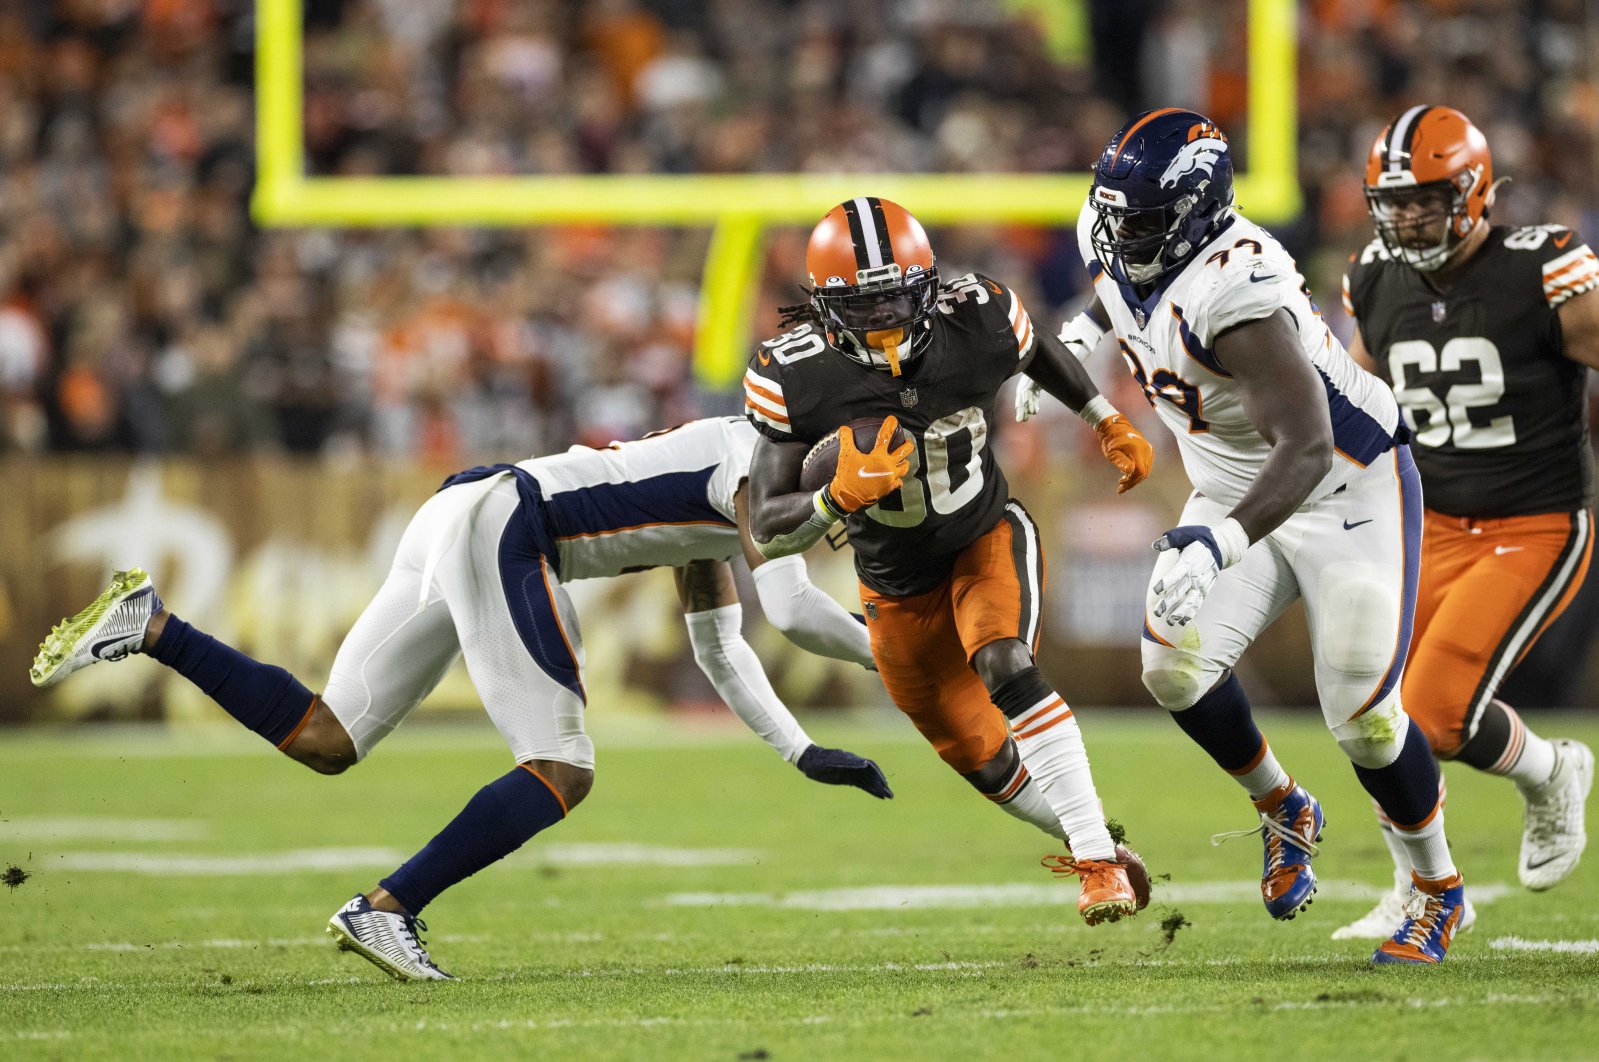 Cleveland Browns running back D'Ernest Johnson (30) runs the ball past the Denver Broncos defense during the second quarter at FirstEnergy Stadium, Cleveland, Ohio, U.S., Oct. 21, 2021. (Scott Galvin-USA TODAY Sports via Reuters)